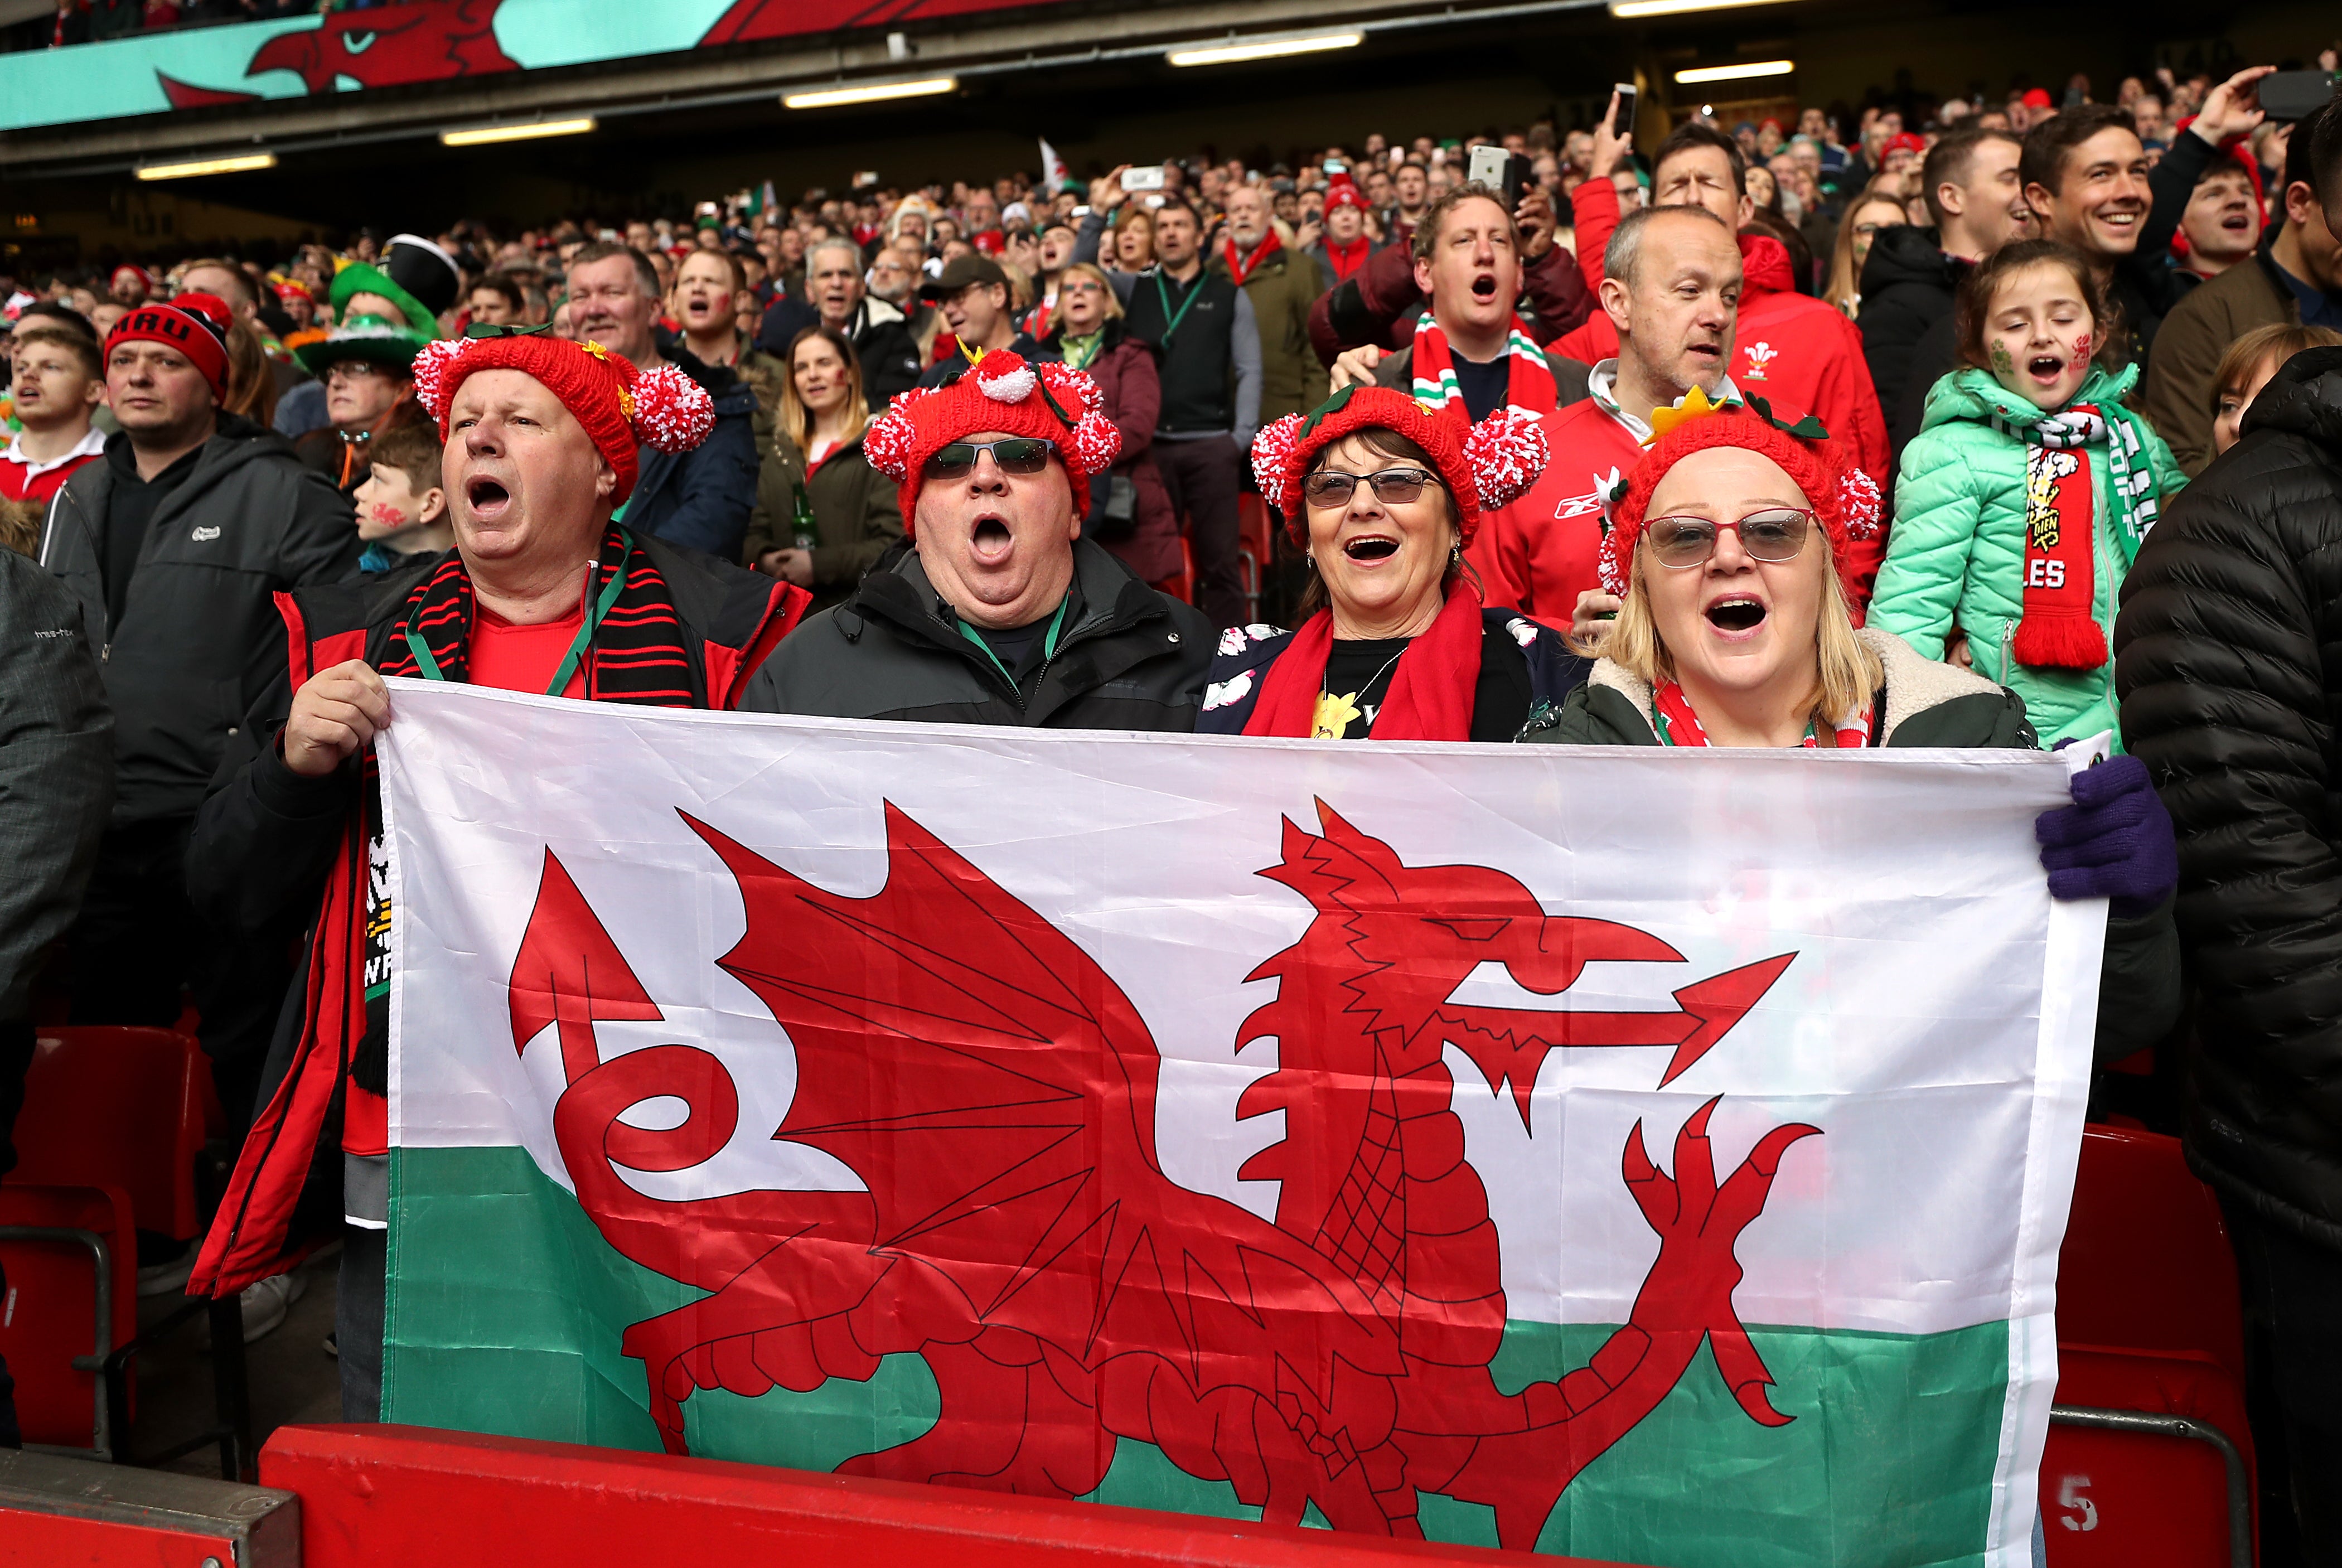 Fans will be allowed into the Principality Stadium to watch Wales’ Six Nations games after the easing of coronavirus restrictions (David Davies/PA)